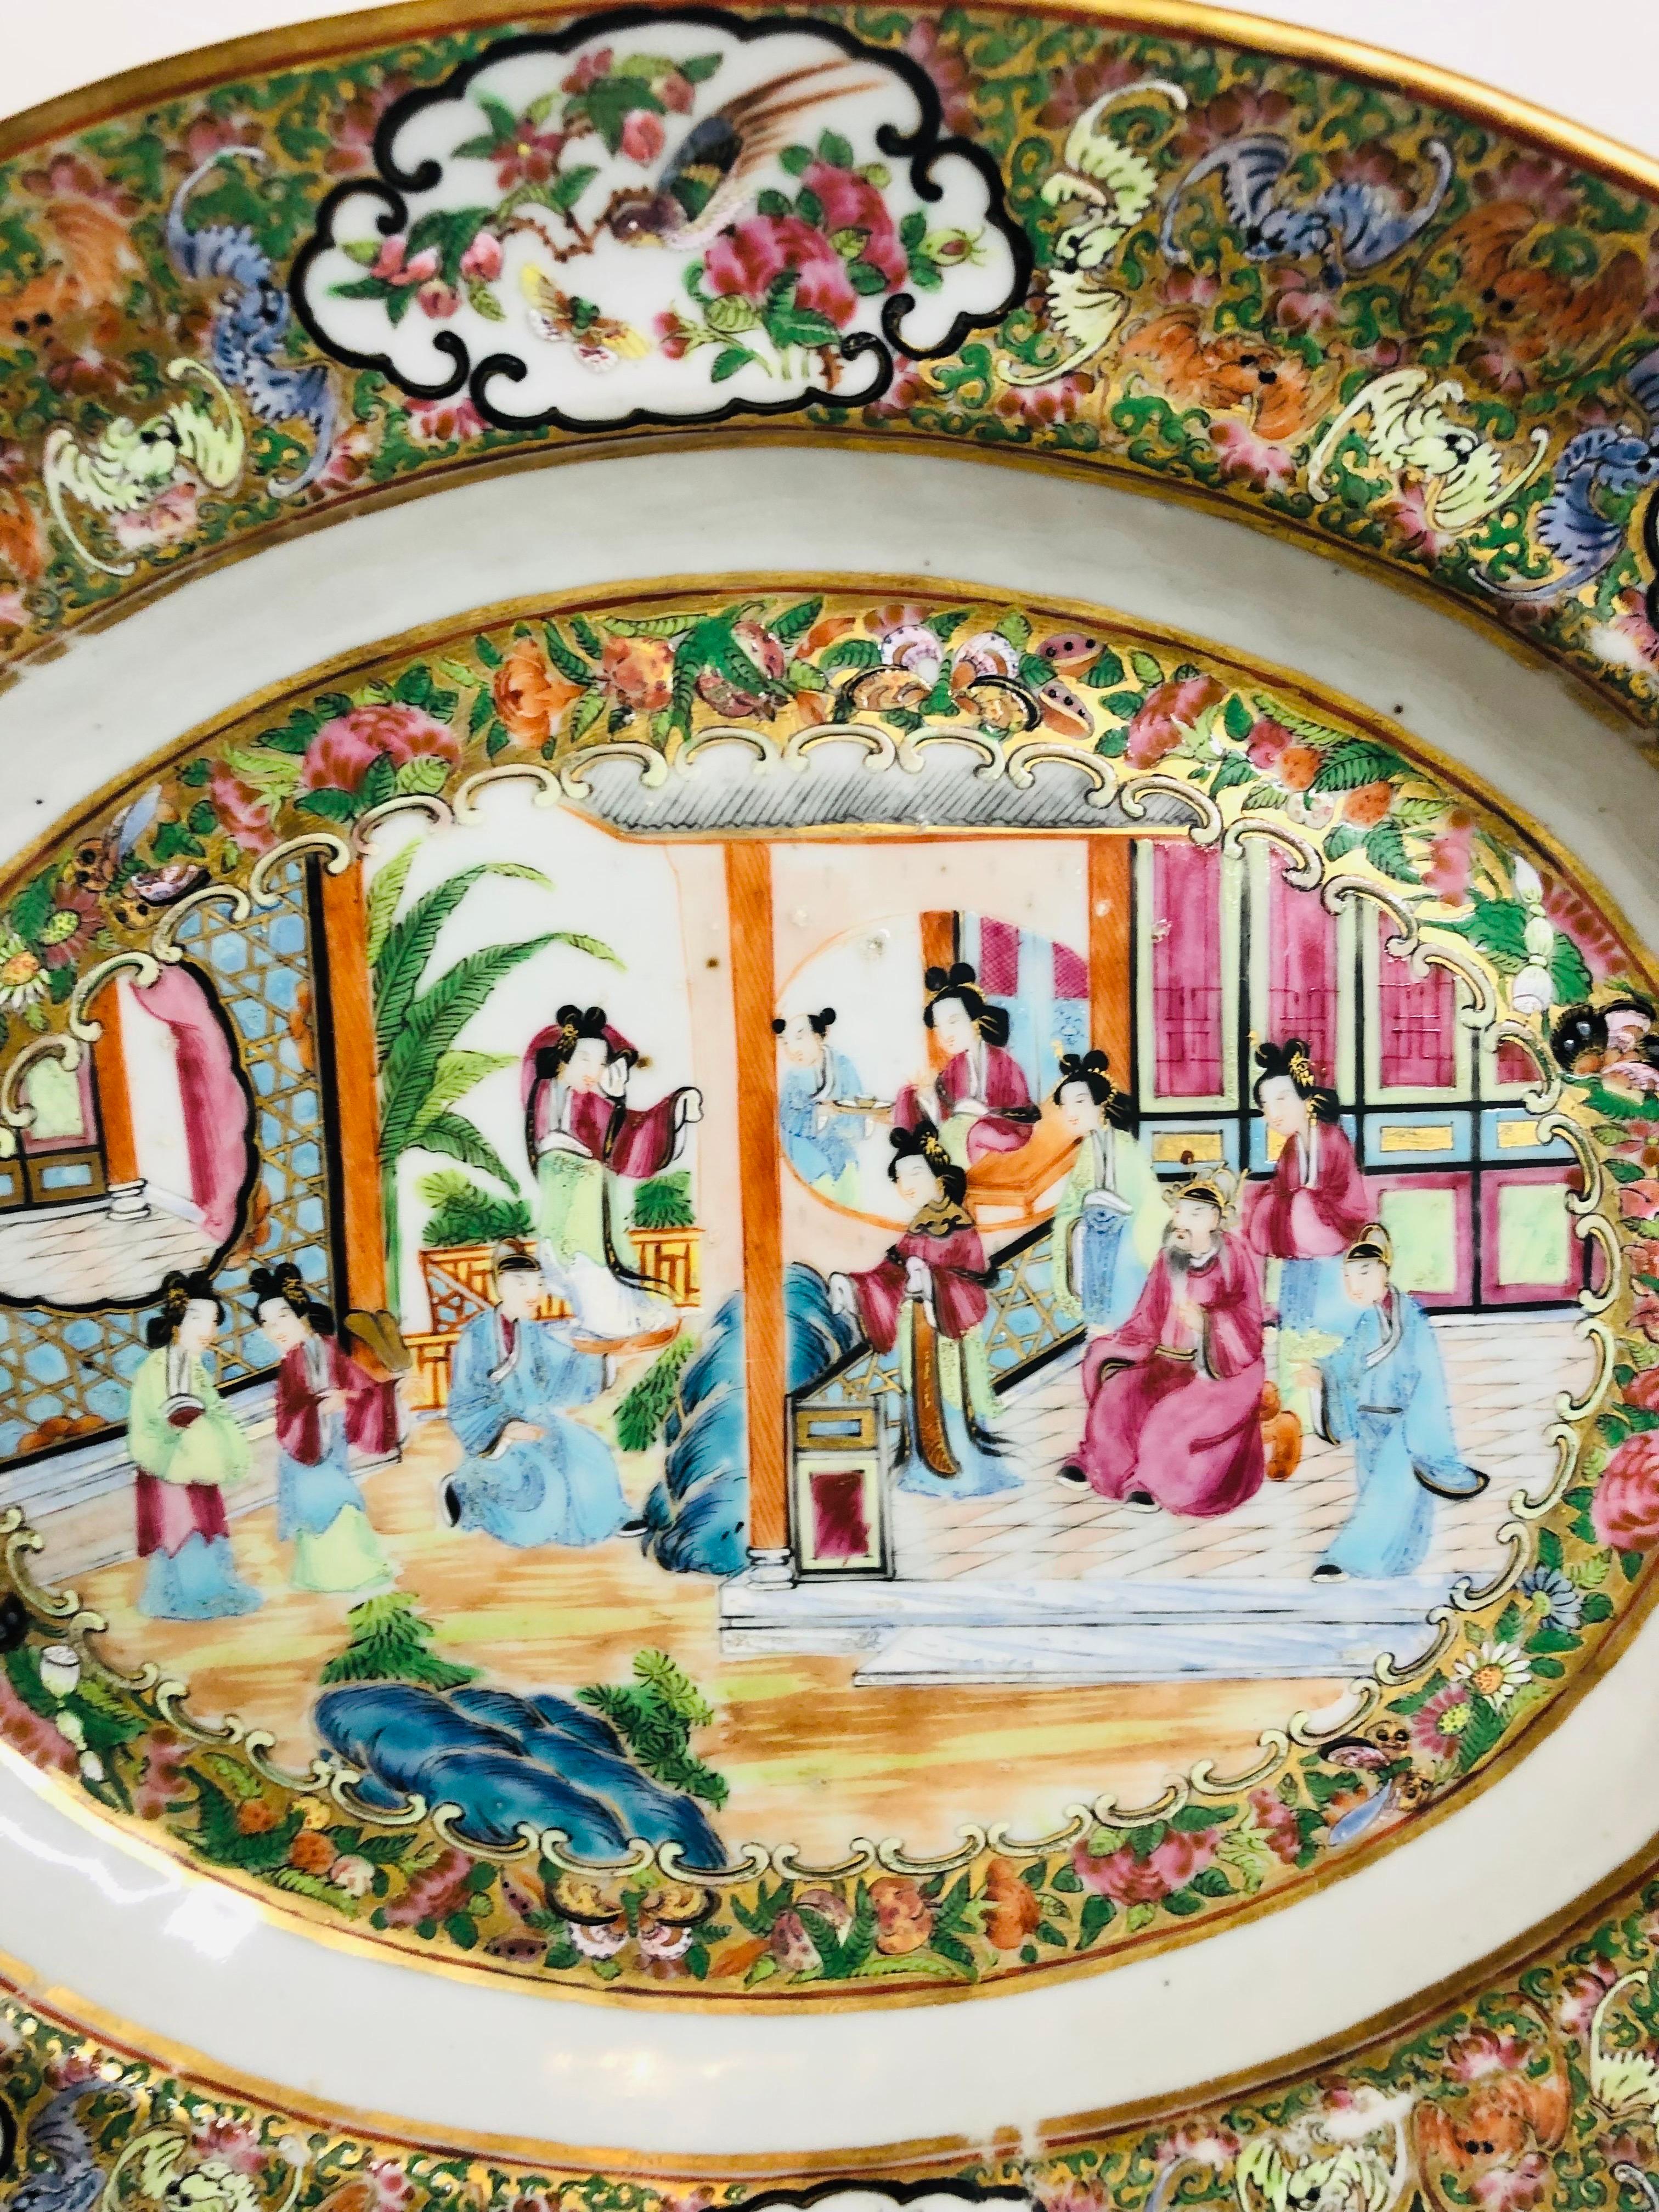 Late 19th Century Rose Canton Chinese Export Platter Painted with Gold and Enamel Decoration